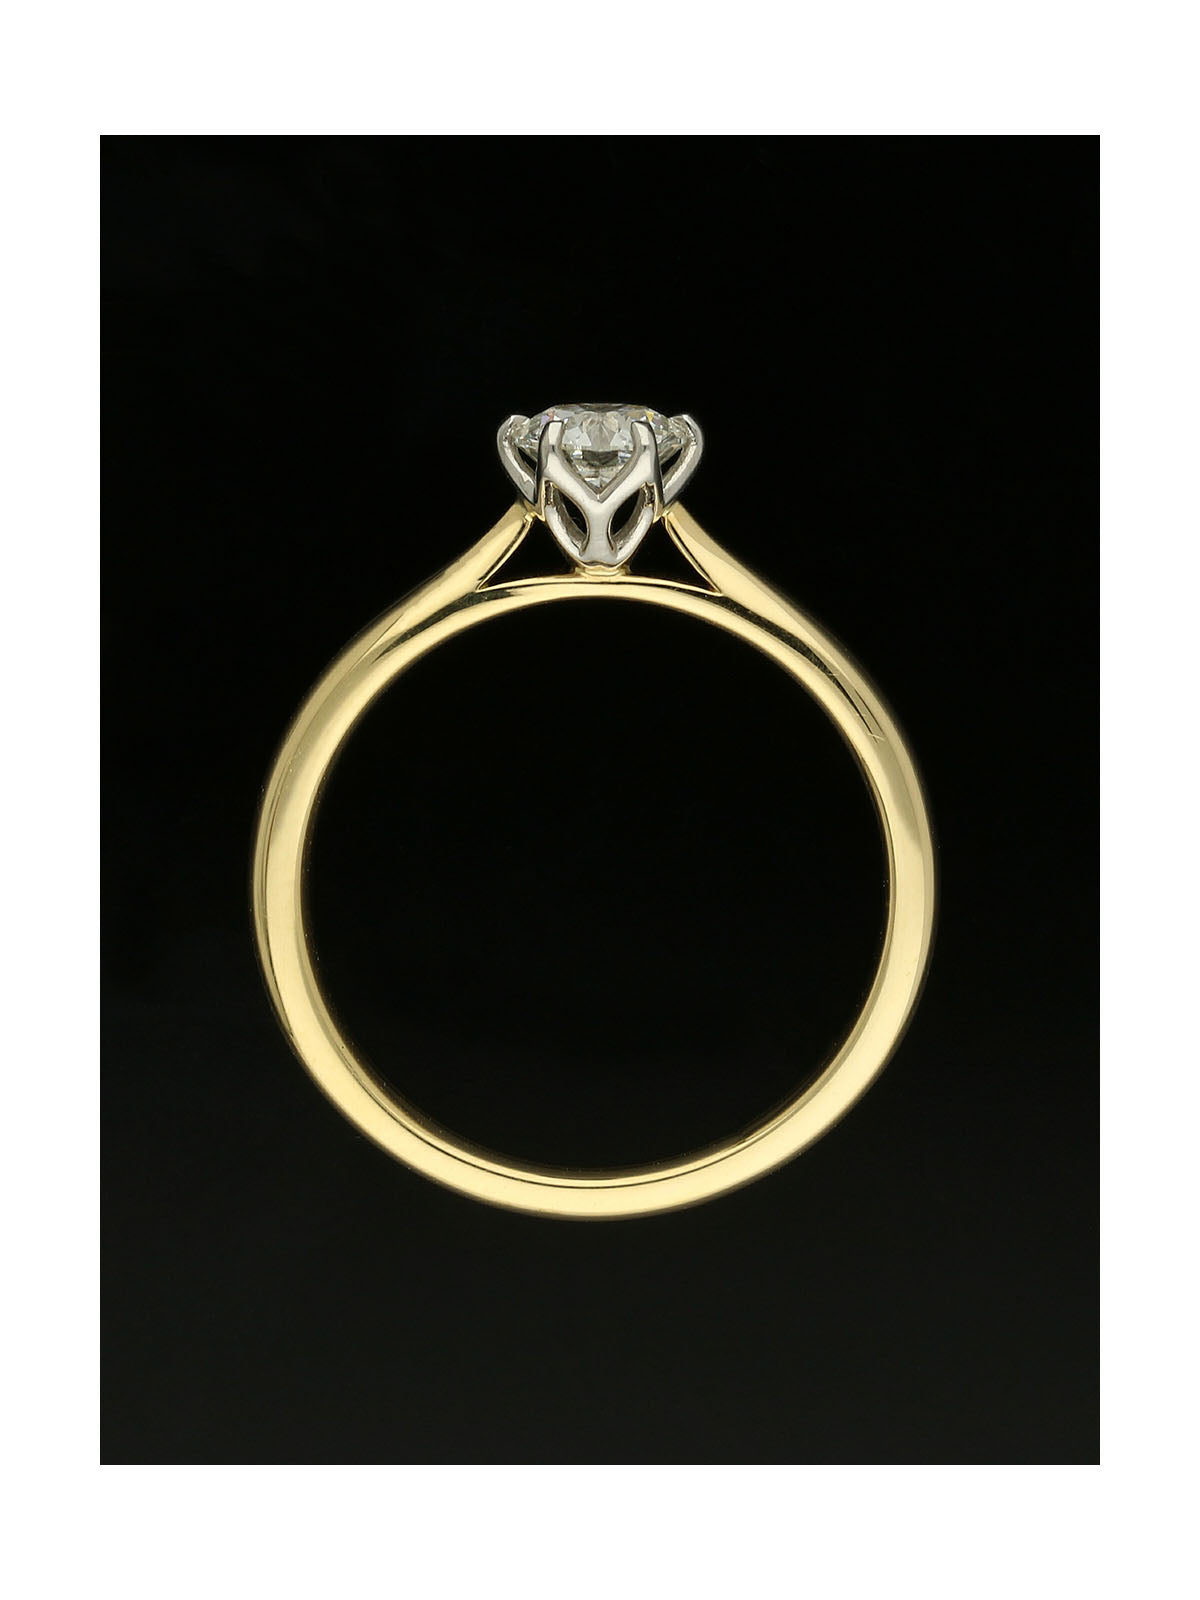 Diamond Solitaire Engagement Ring 0.50ct Certificated Round Brilliant Cut in 18ct Yellow Gold & Platinum